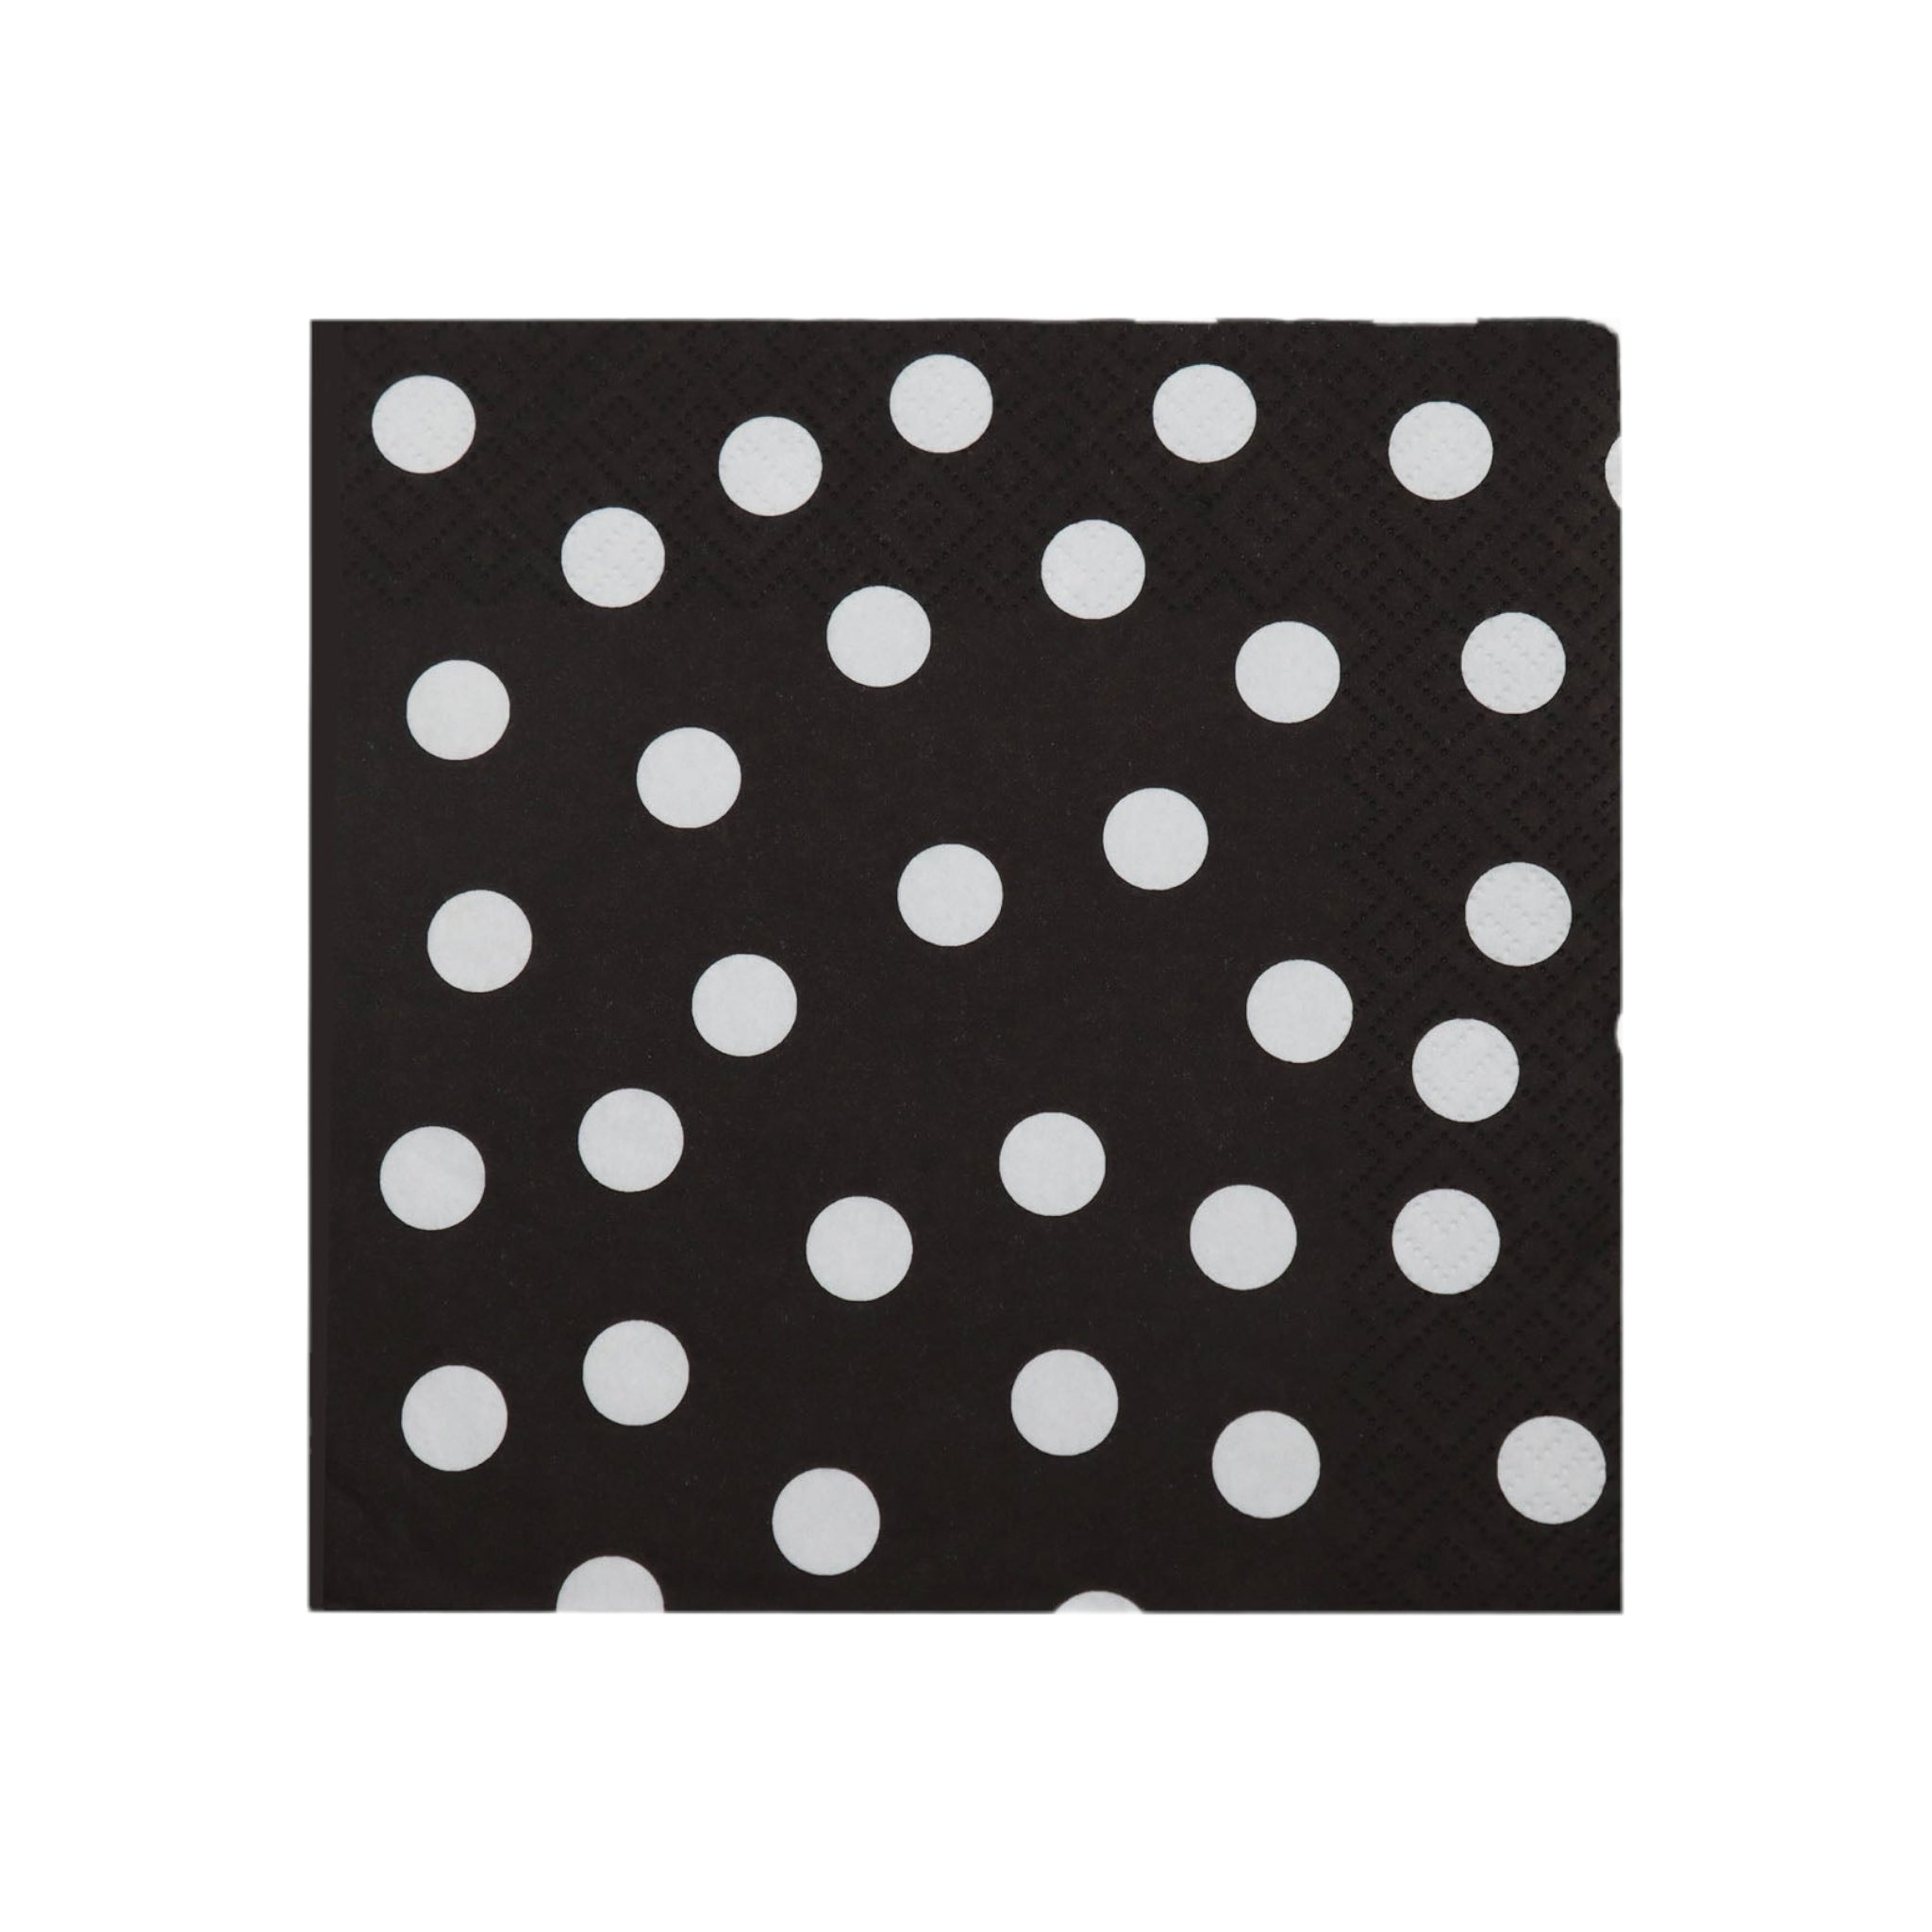 Luncheon Table Paper Serviettes 3ply 33x33cm Black Polka Dot 20pack